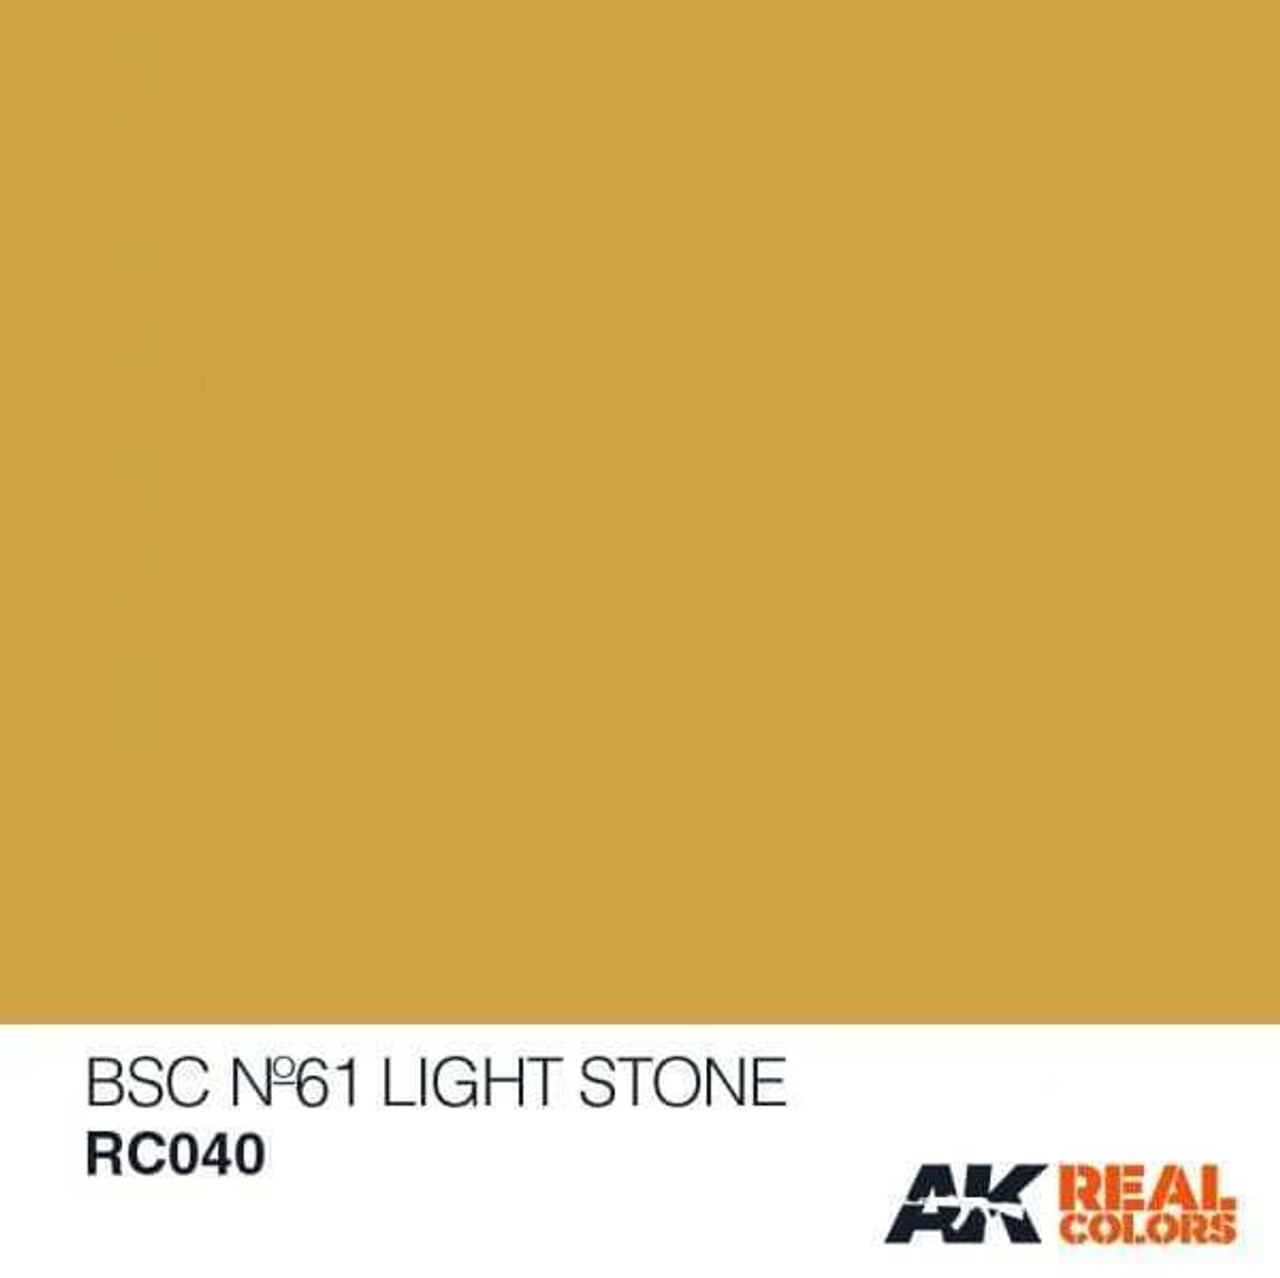 AKIRC40 Real Colors  BSC Nº61 Light Stone Acrylic Lacquer Paint 10ml Bottle